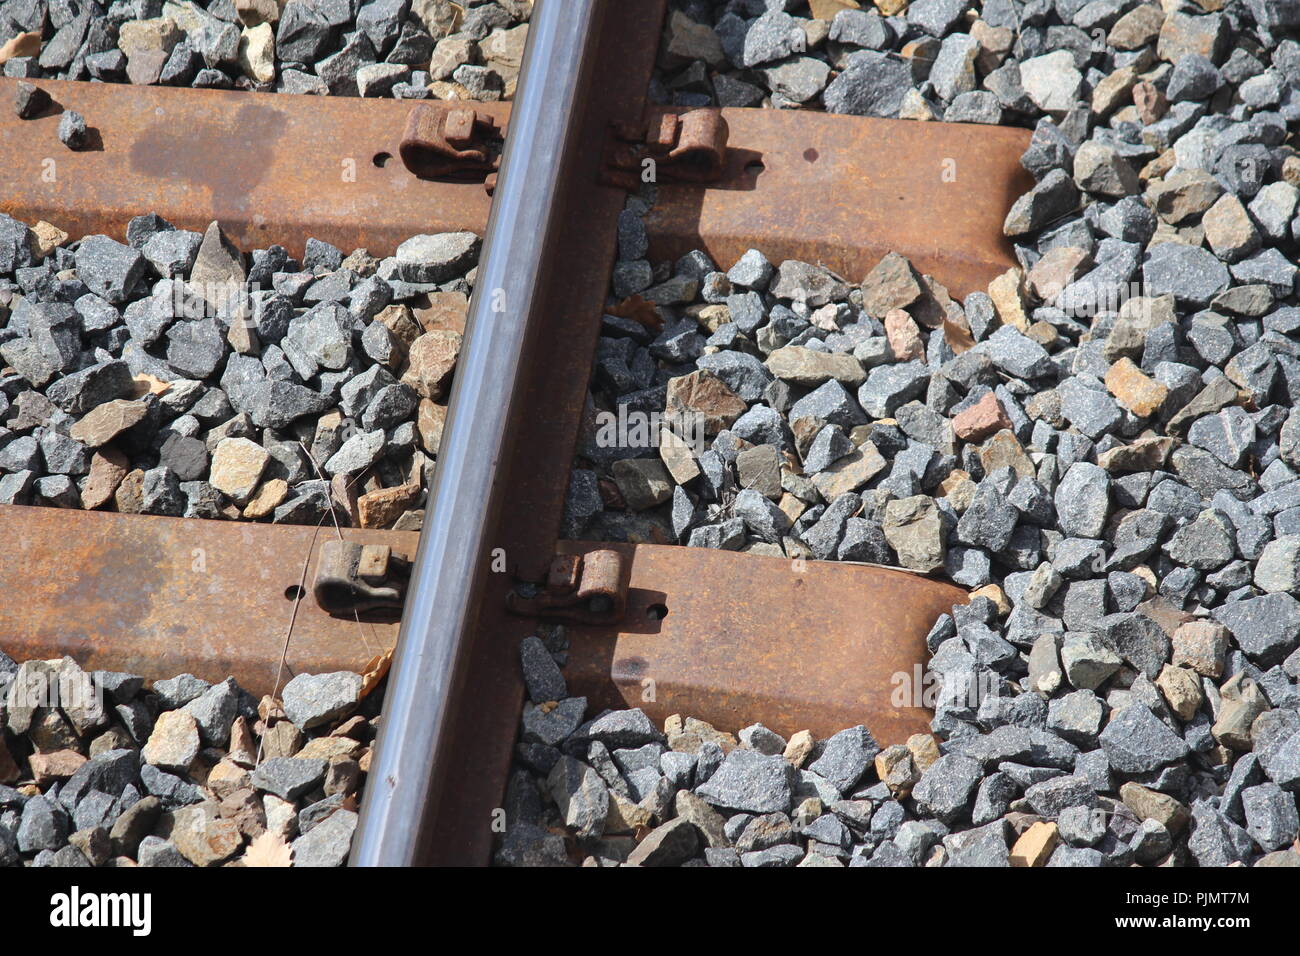 Railway track, sleepers and ties on a sunny day in NSW, Australia. Stock Photo